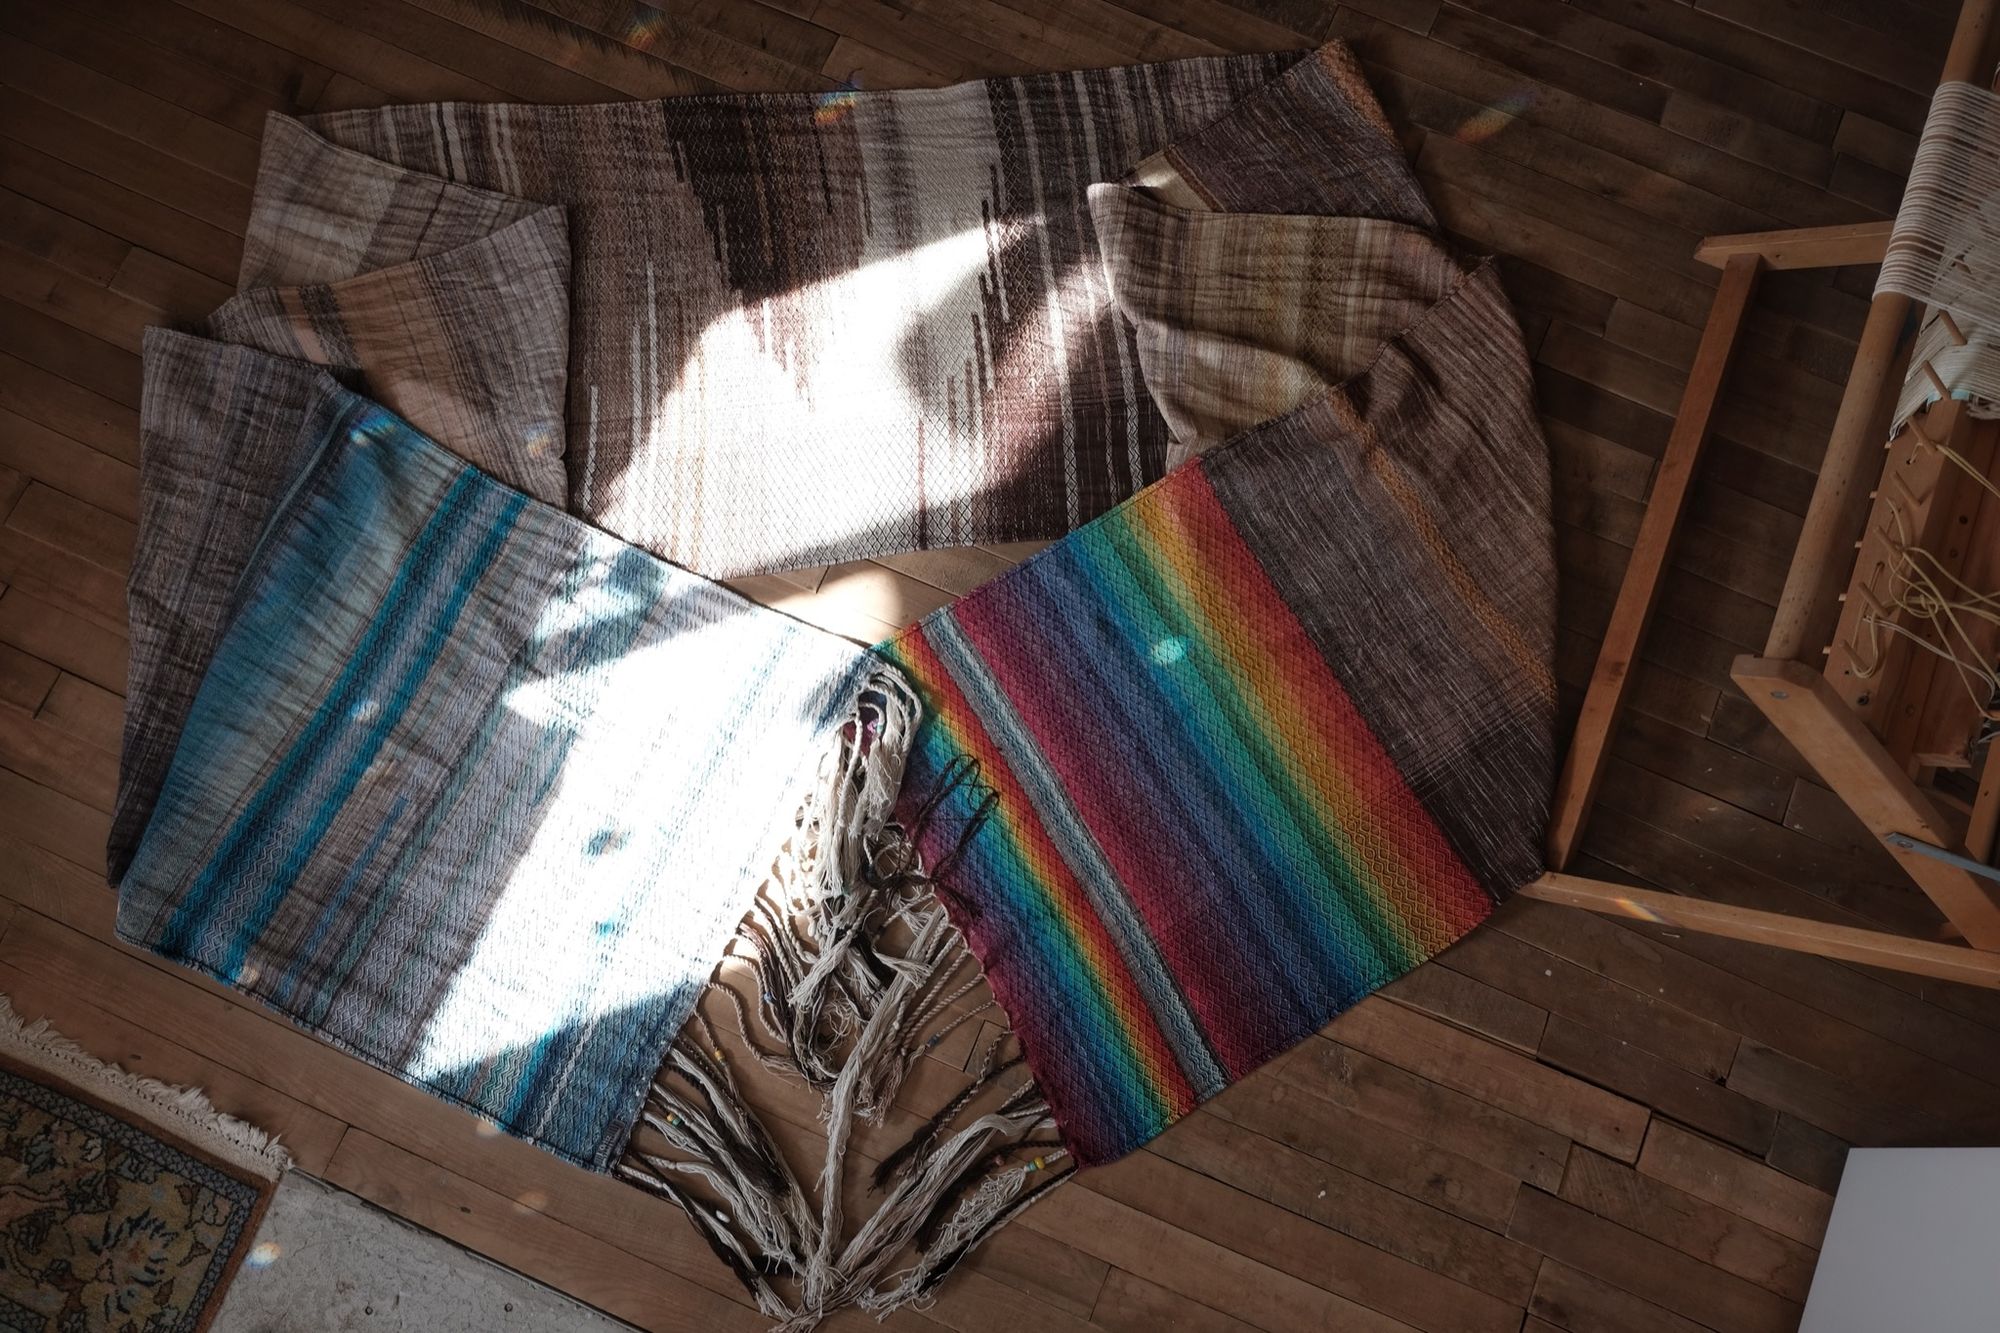 Handwoven fabric with a diamond pattern in brown, cream, white and rainbow colors laying on a wooden floor